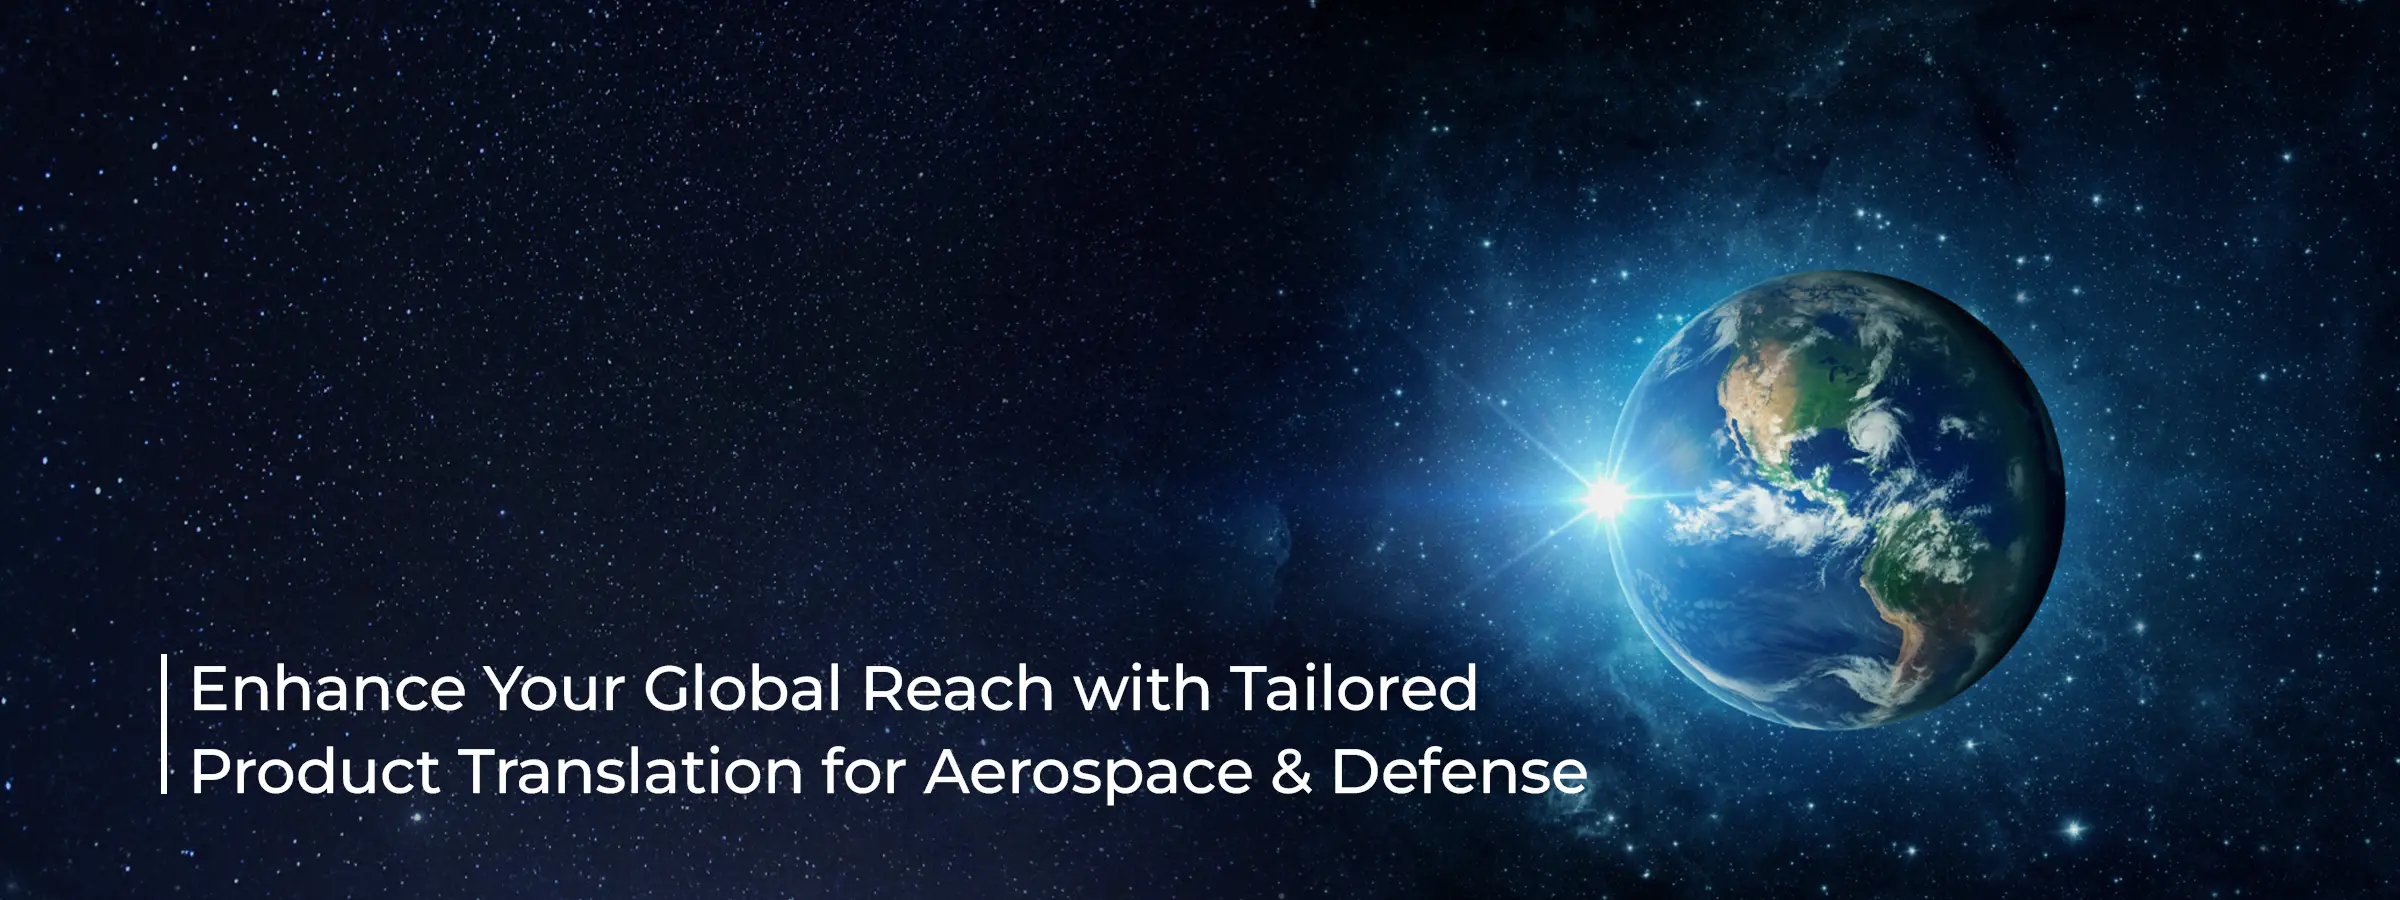 enhance-your-global-reach-with-tailored-product-translation-for-aerospace-defense